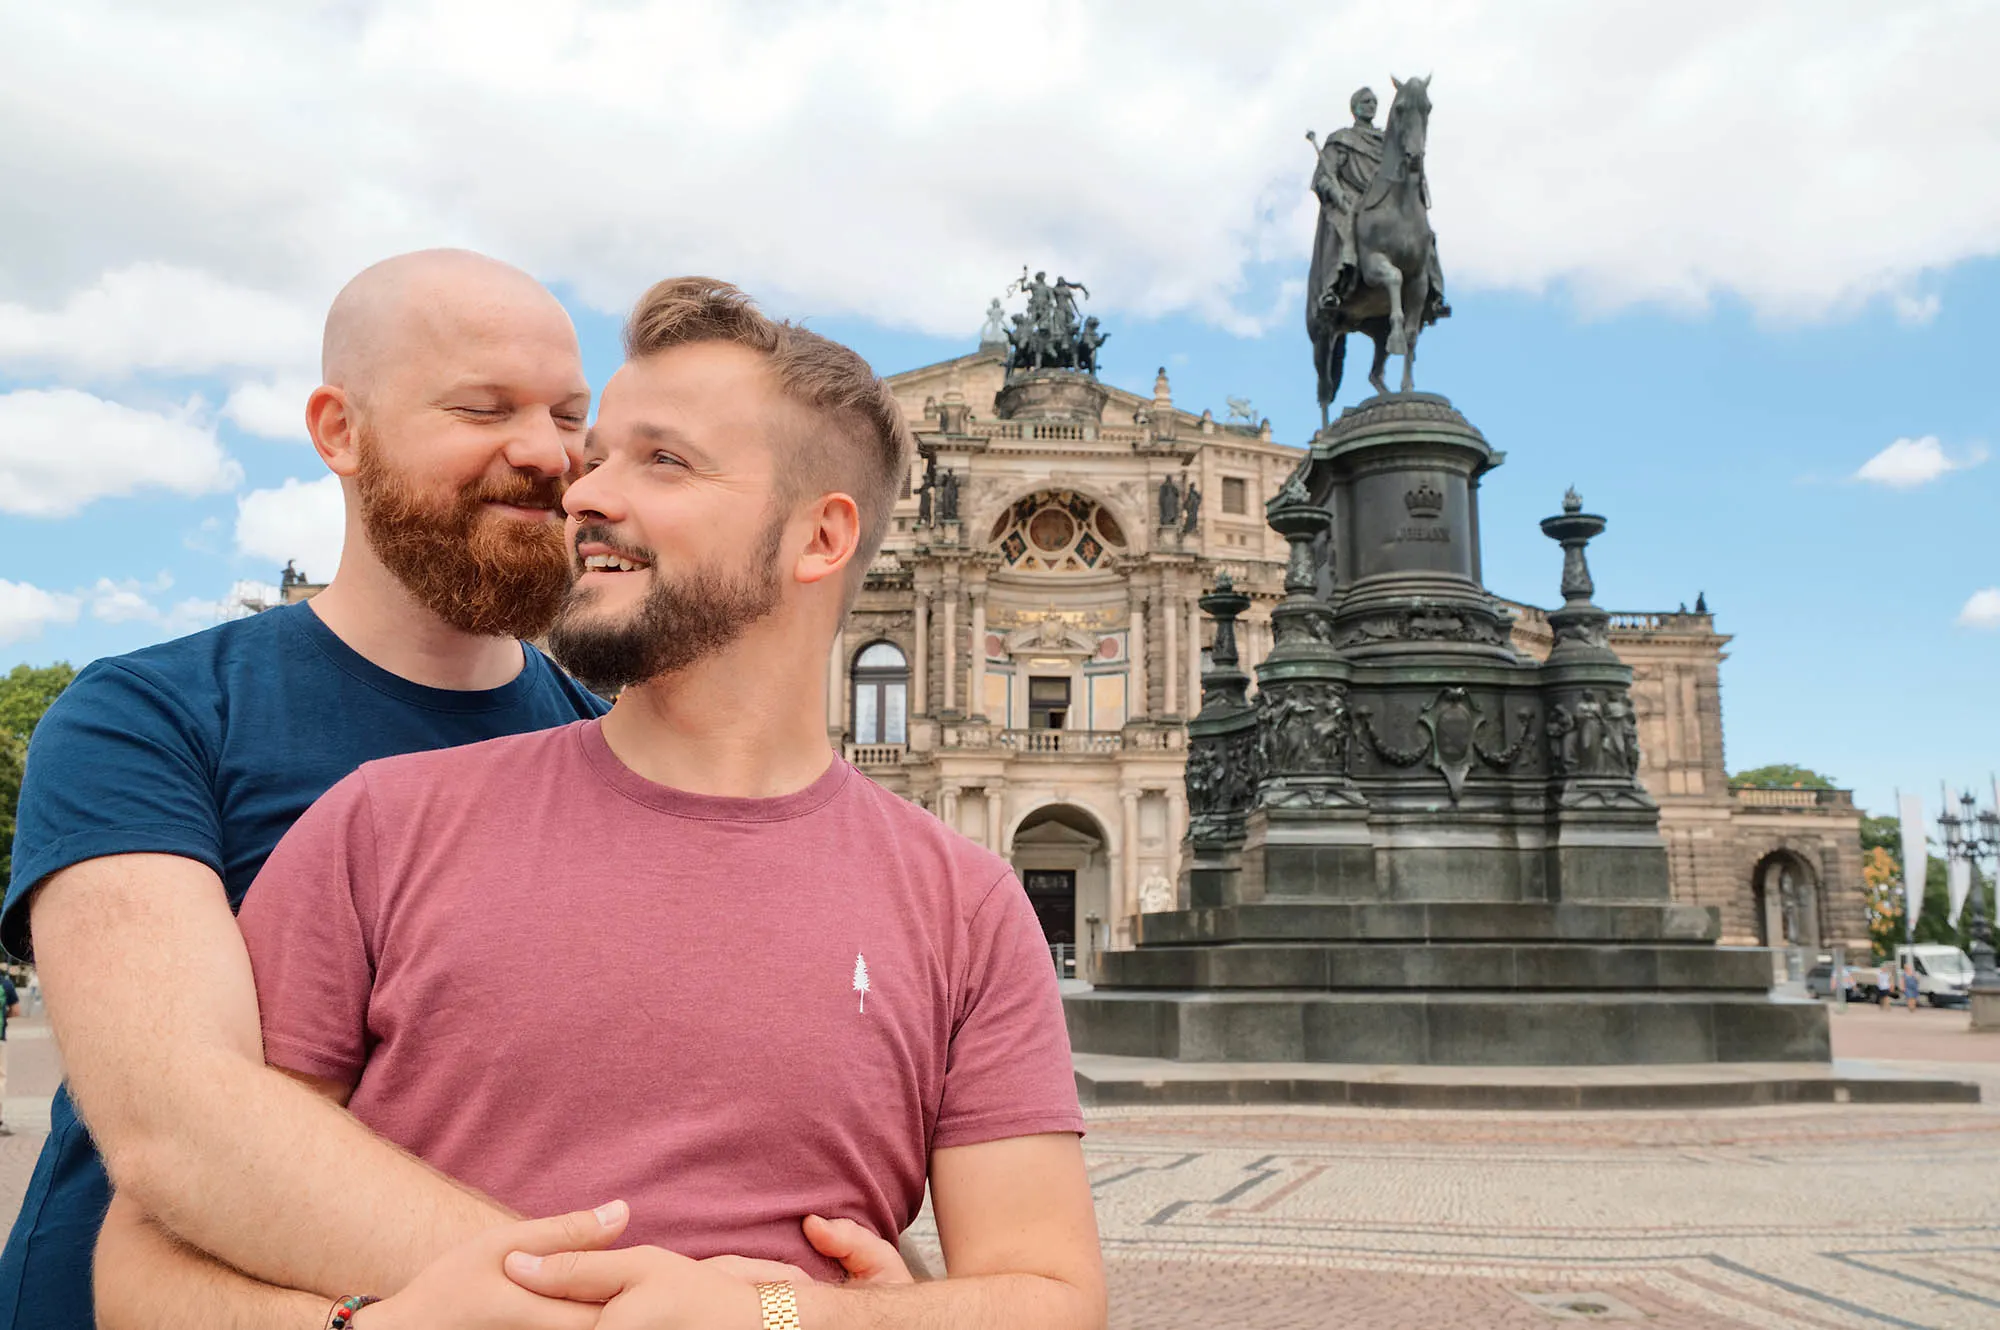 Dresden Gay City Trip: Gay Couple arm-in-arm in front of the Semper Opera © Coupleofmen.com